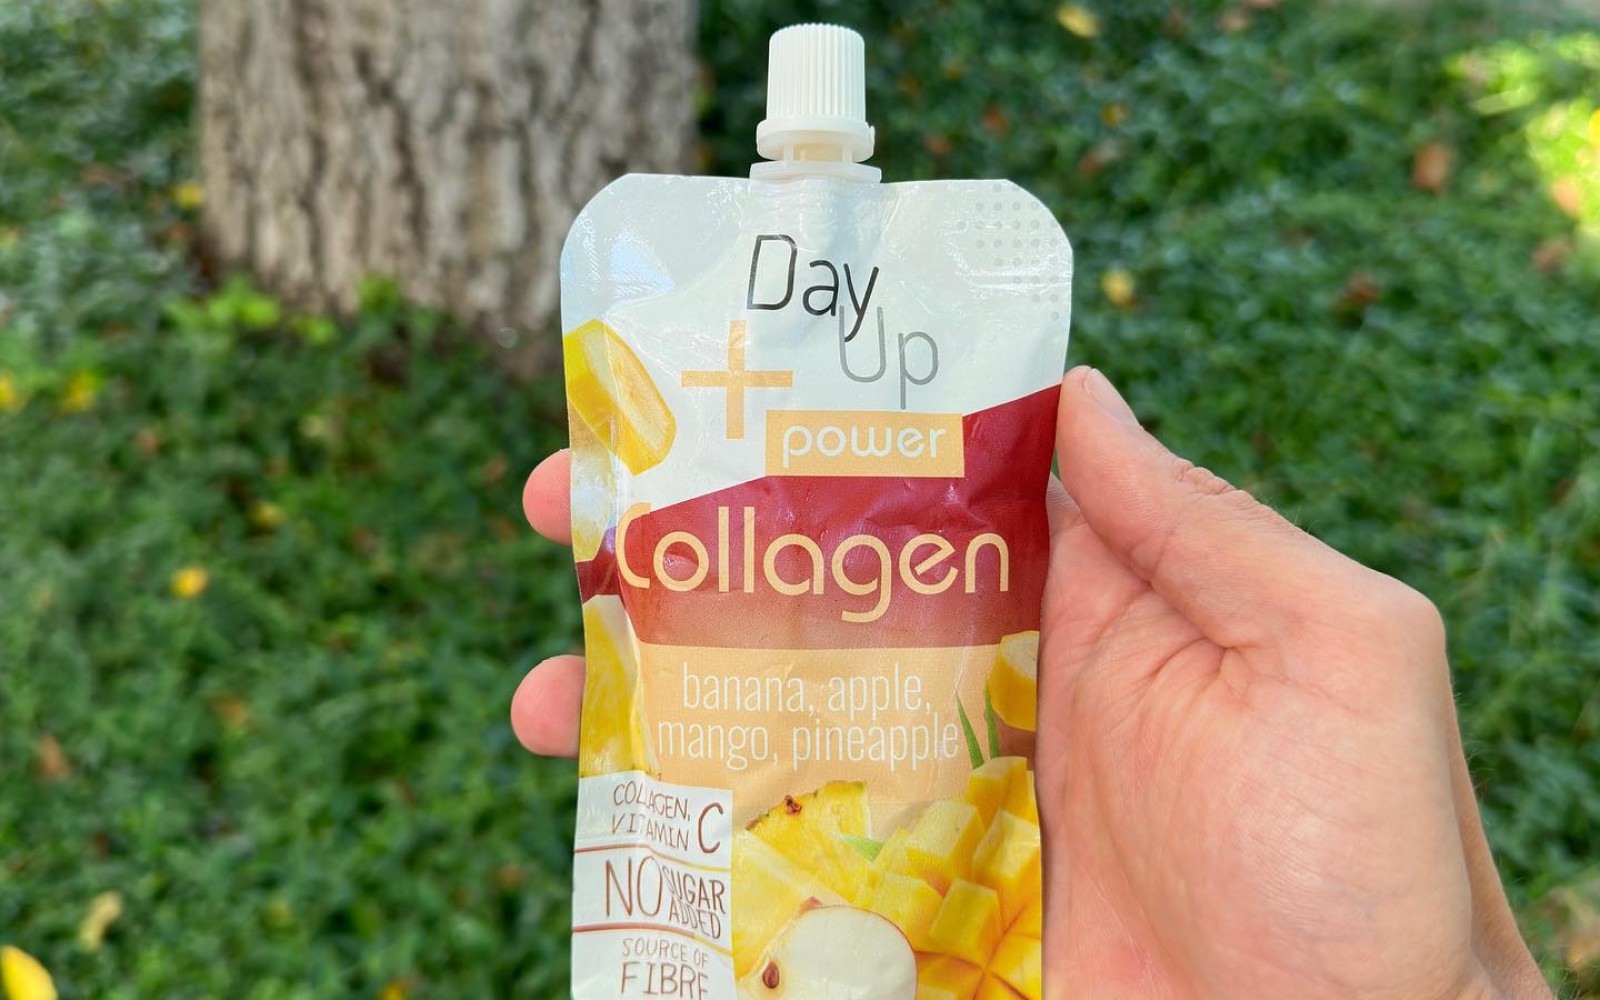 Fill yourself up with Day Up's collagen-free, gluten-free delicacy!